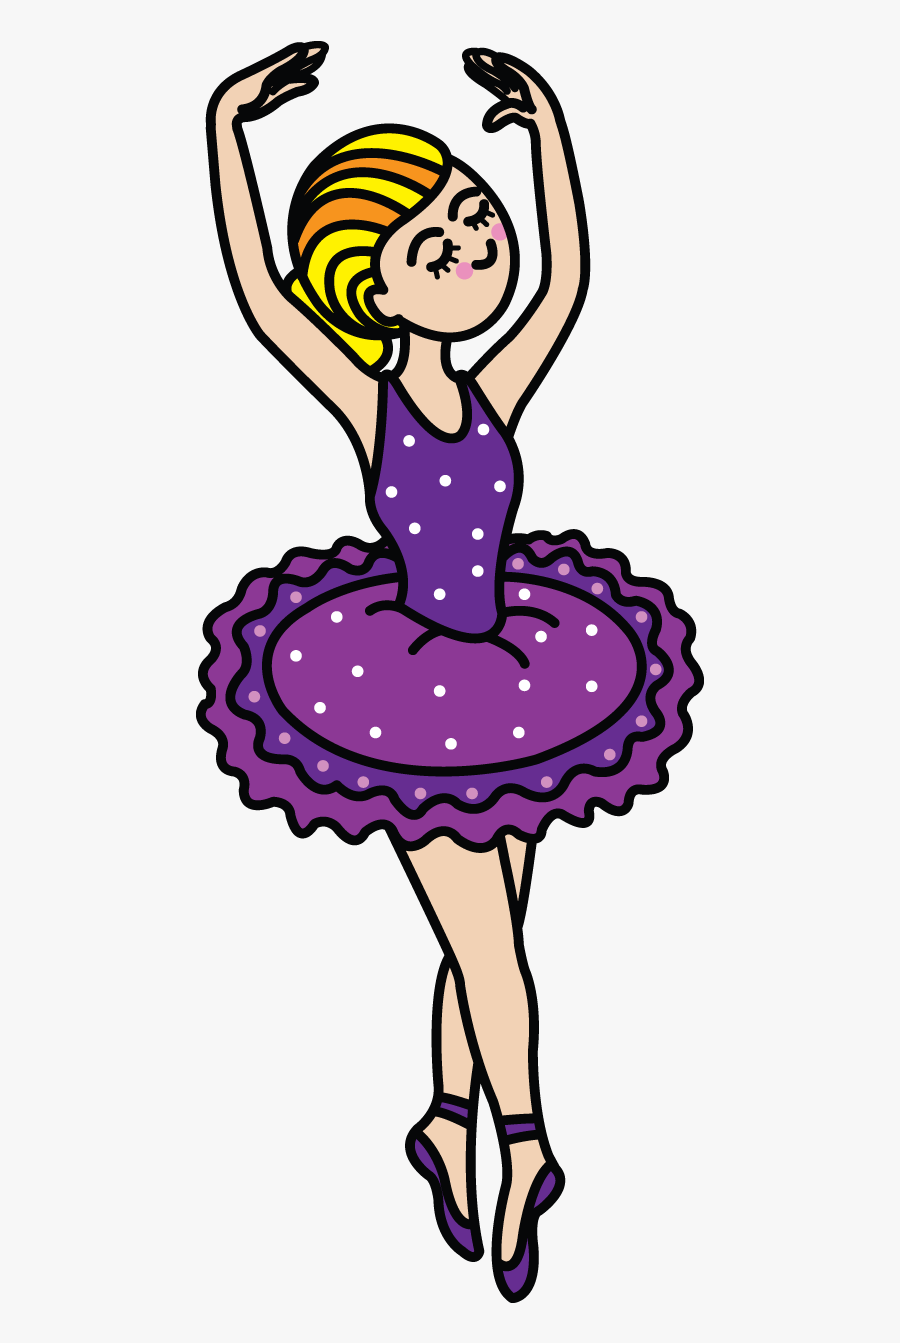 Easy To Draw Cartoon Ballerina Clipart , Png Download - Easy To Draw Cartoon Ballerina, Transparent Clipart